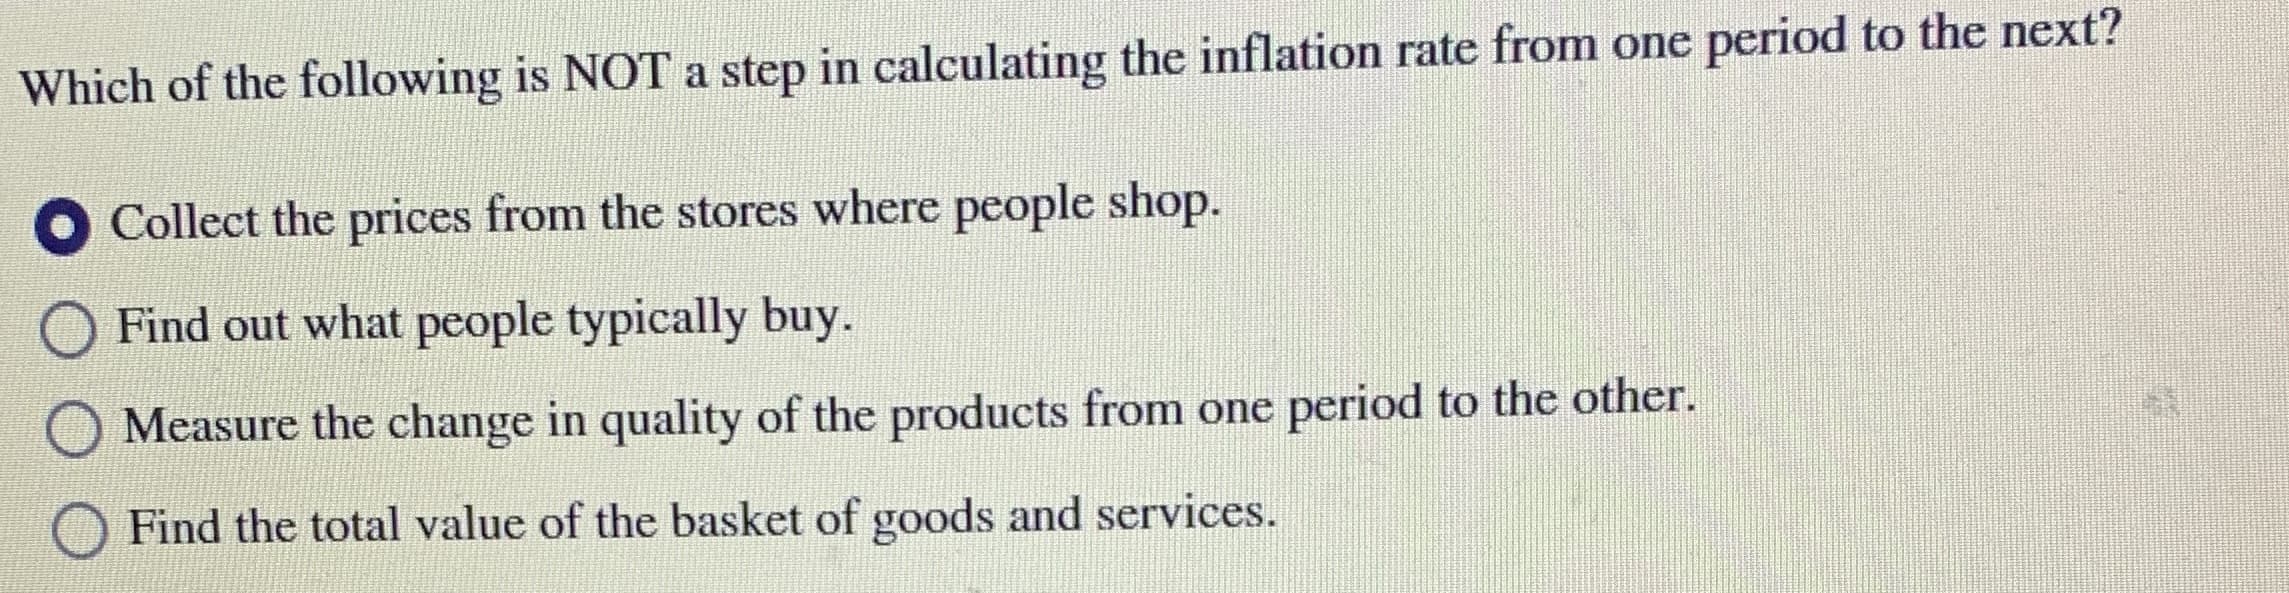 Which of the following is NOT a step in calculating the inflation rate from one period to the next?
Collect the prices from the stores where people shop.
O Find out what people typically buy.
Measure the change in quality of the products from one period to the other.
Find the total value of the basket of goods and services.
